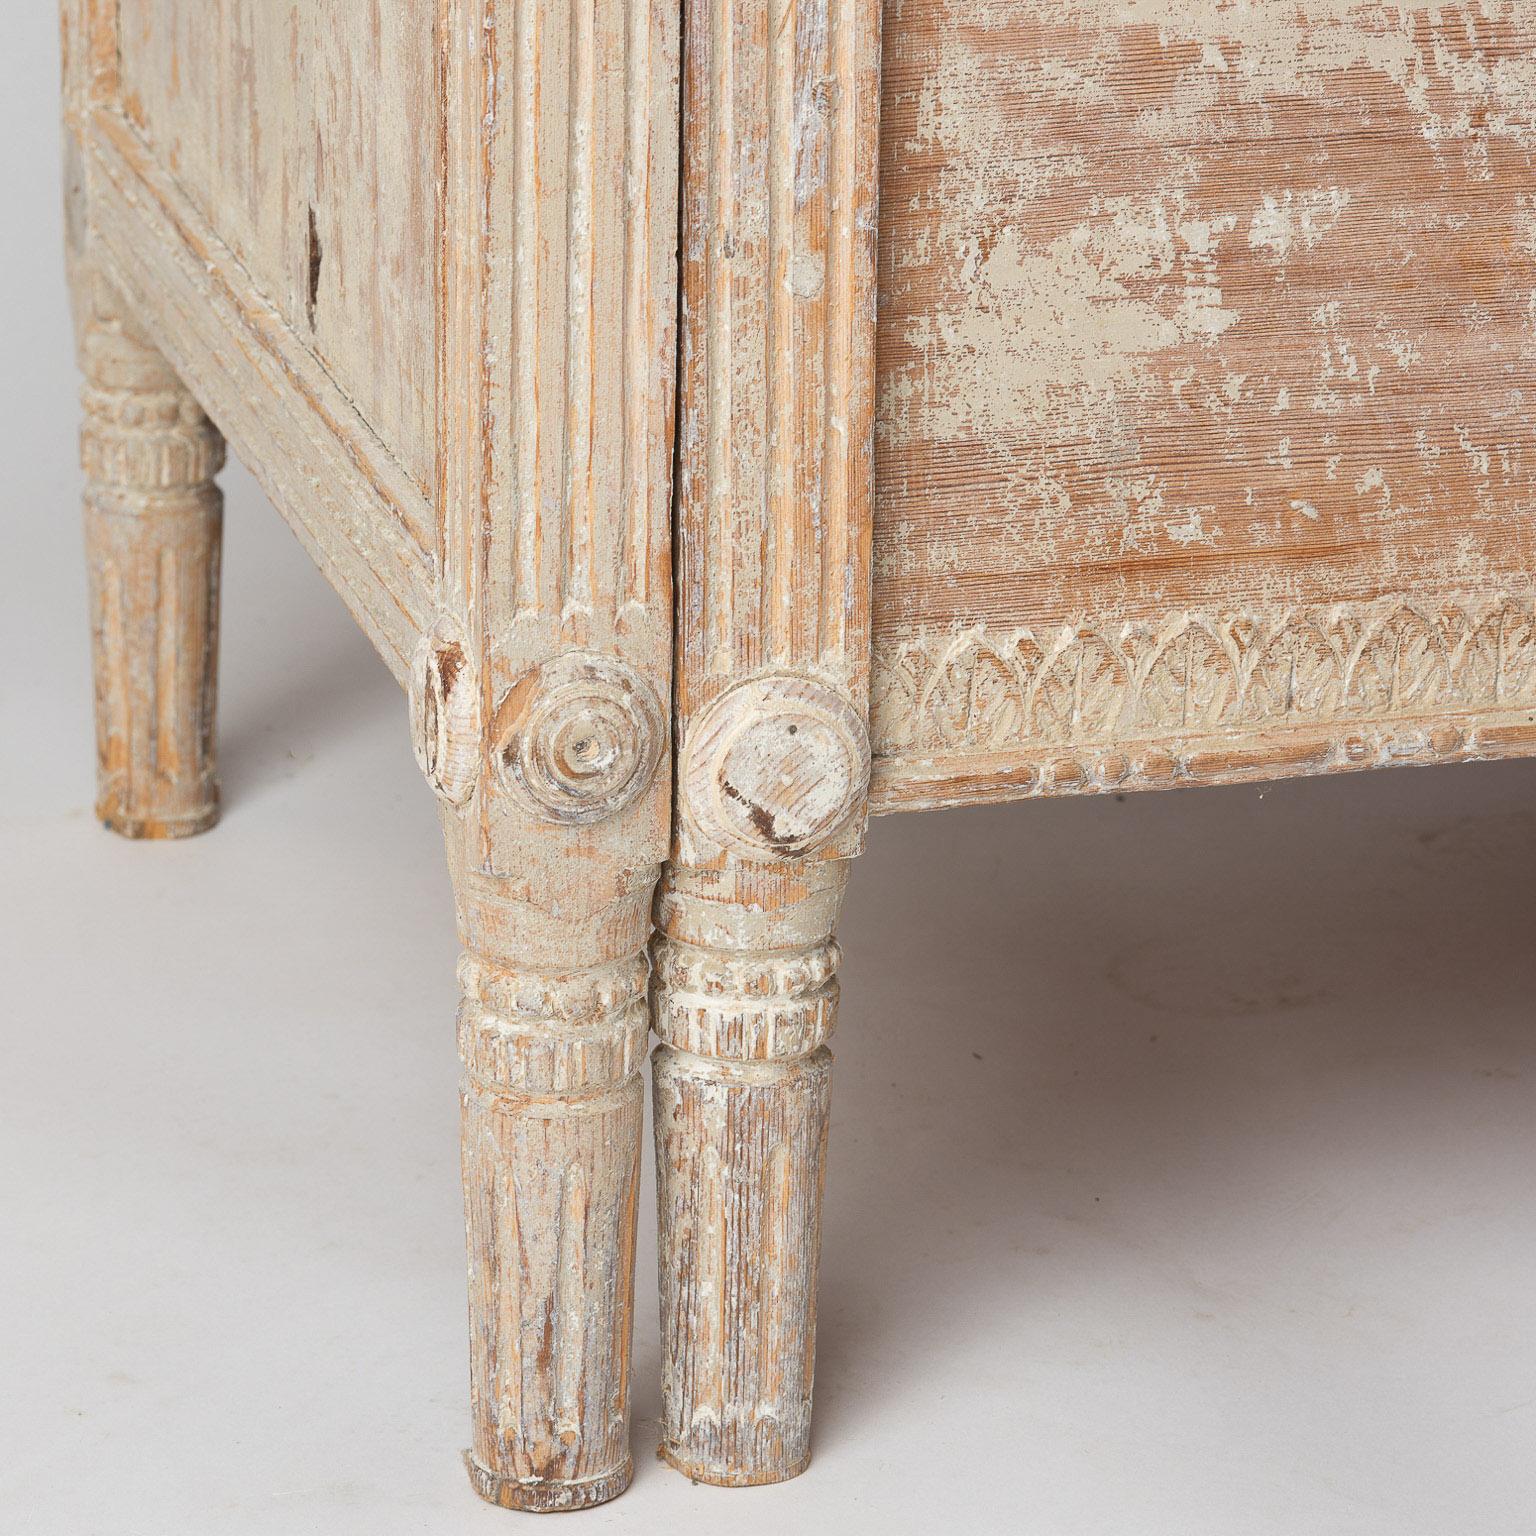 Swedish Gustavian Period Bench in Original Paint with Elaborate Bow, circa 1790 For Sale 2